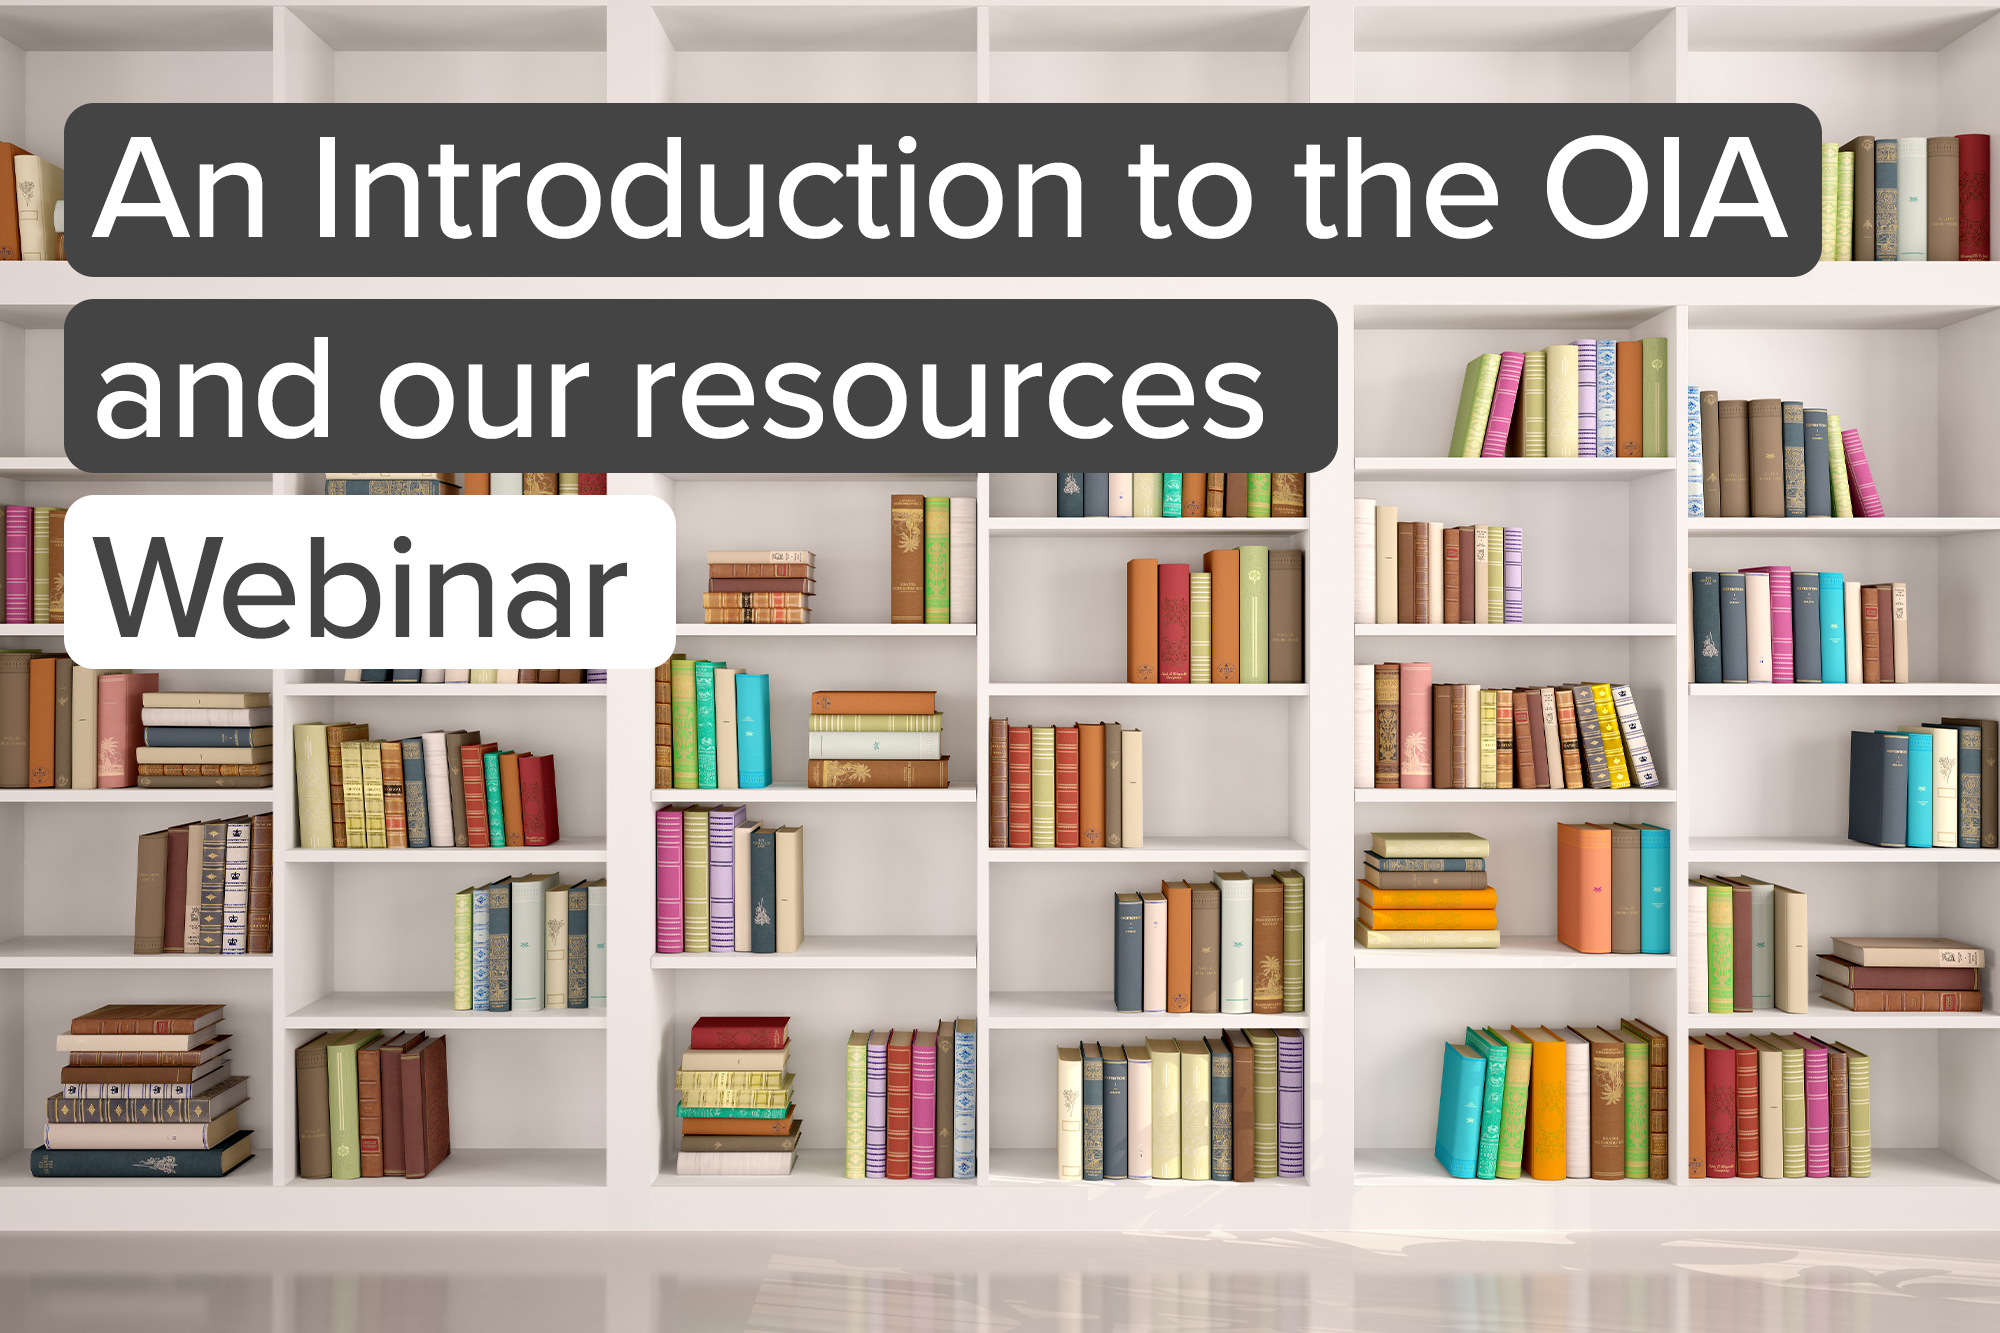 An Introduction to the OIA and our Resources